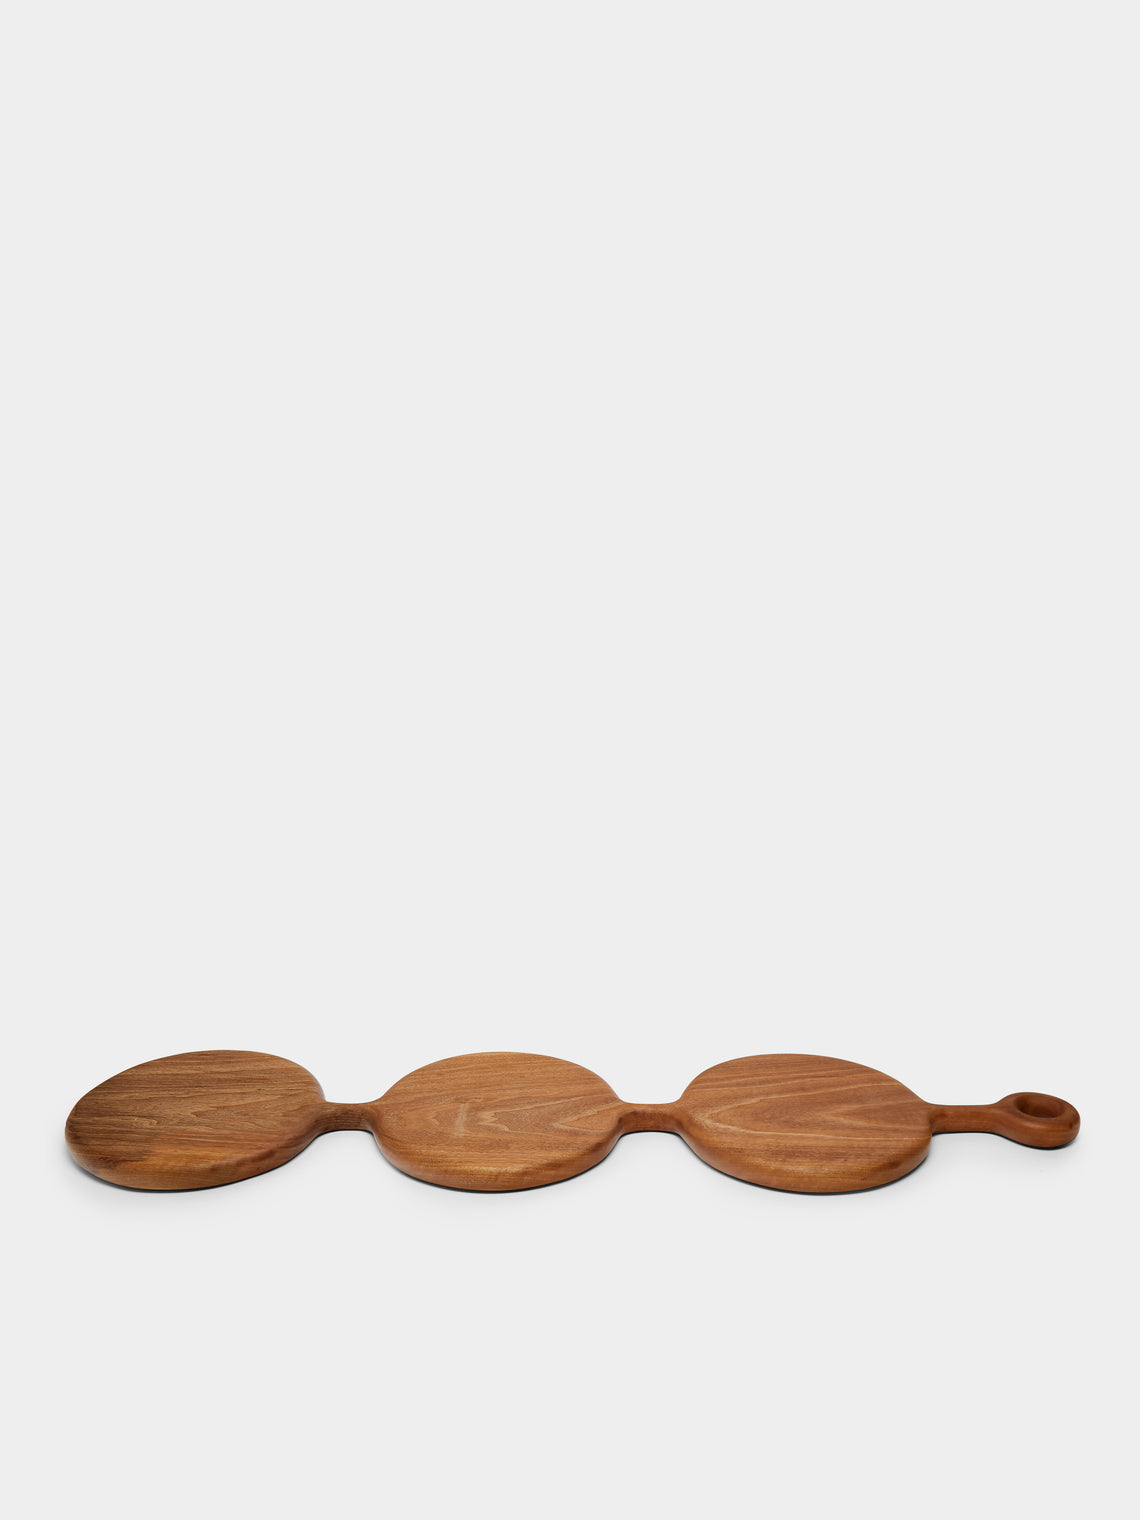 Lucas Castex - No. 3 Hand-Carved Oiled Walnut Serving Board -  - ABASK